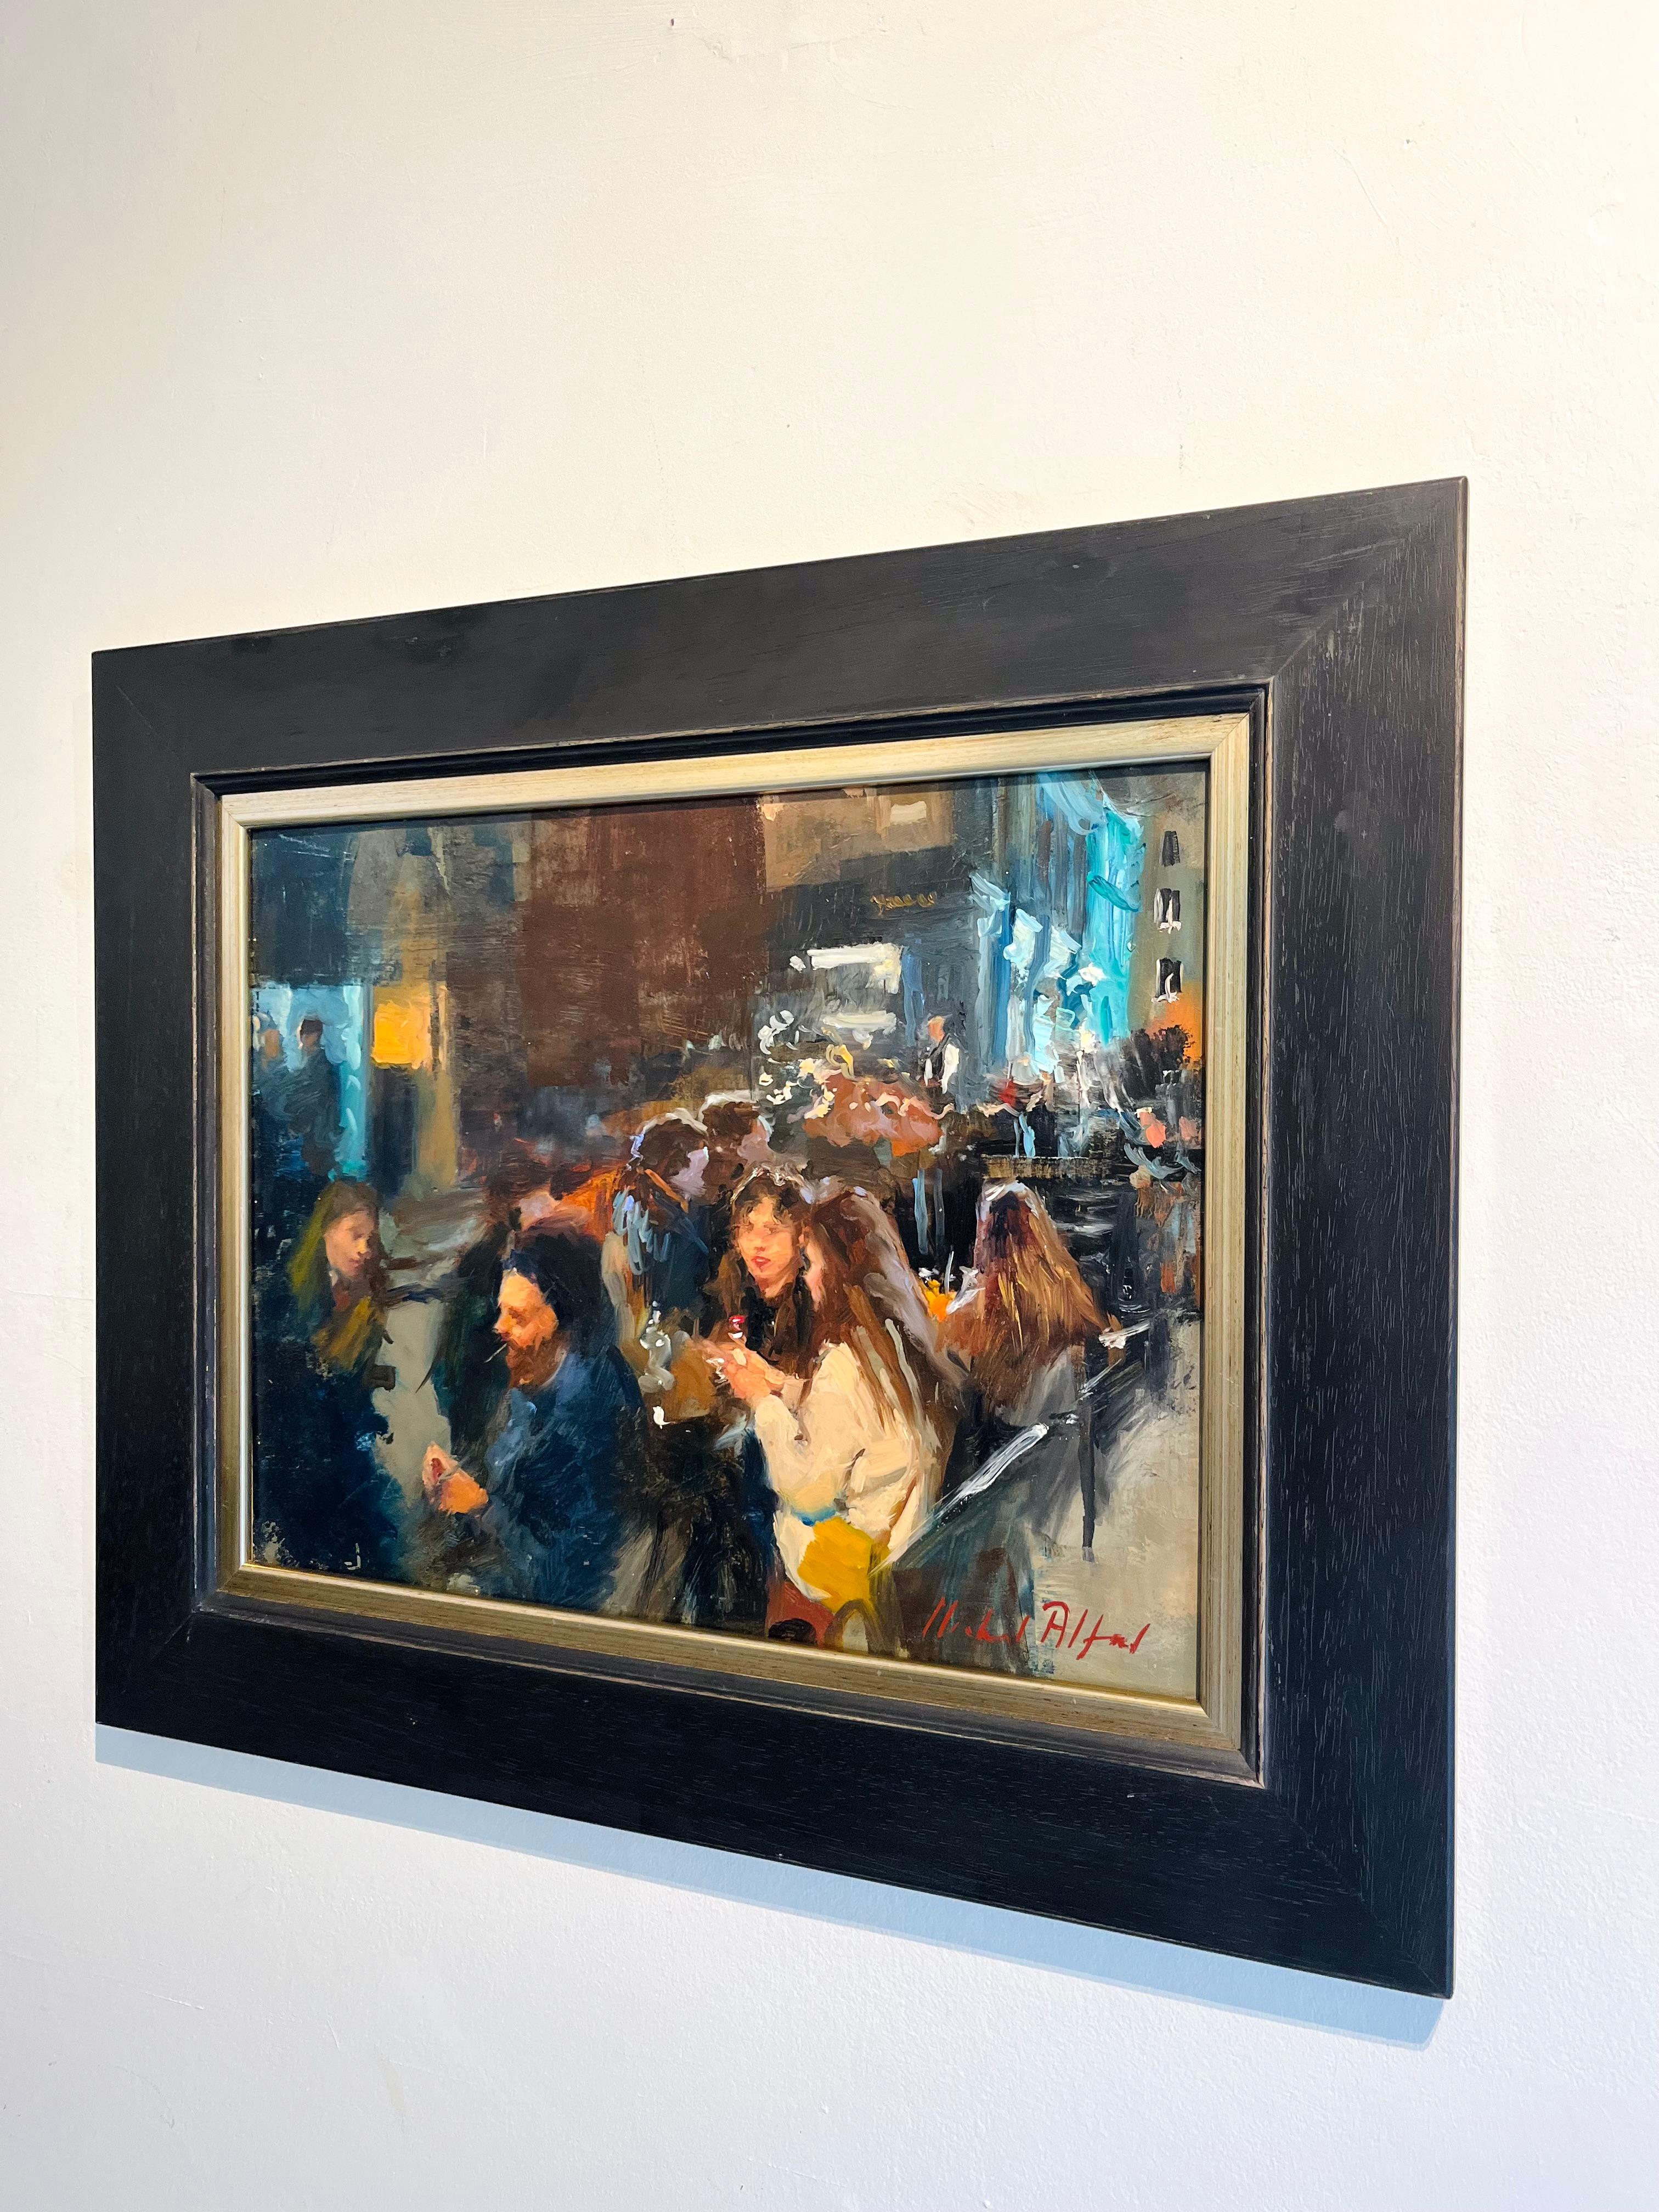 Outside Dining, West End-original impressionism figurative cityscape painting  - Impressionist Painting by Michael Alford